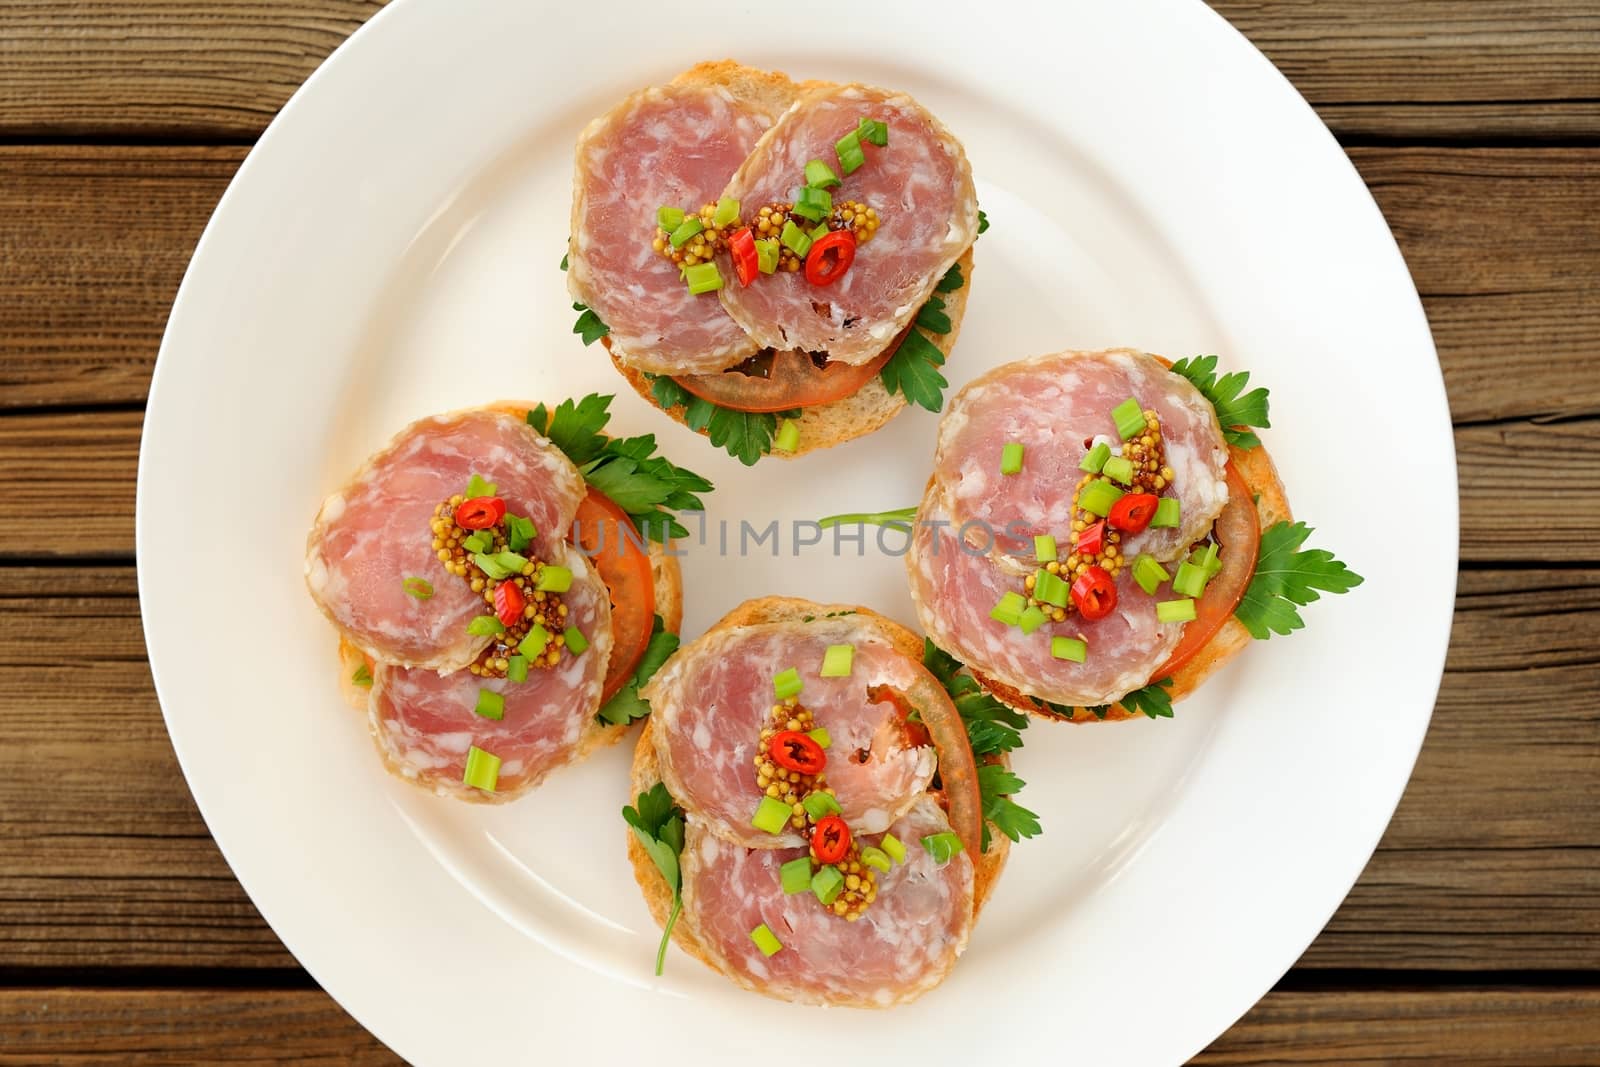 Ham sandwiches with chili, parsley and scallion on white plate top view horizontal